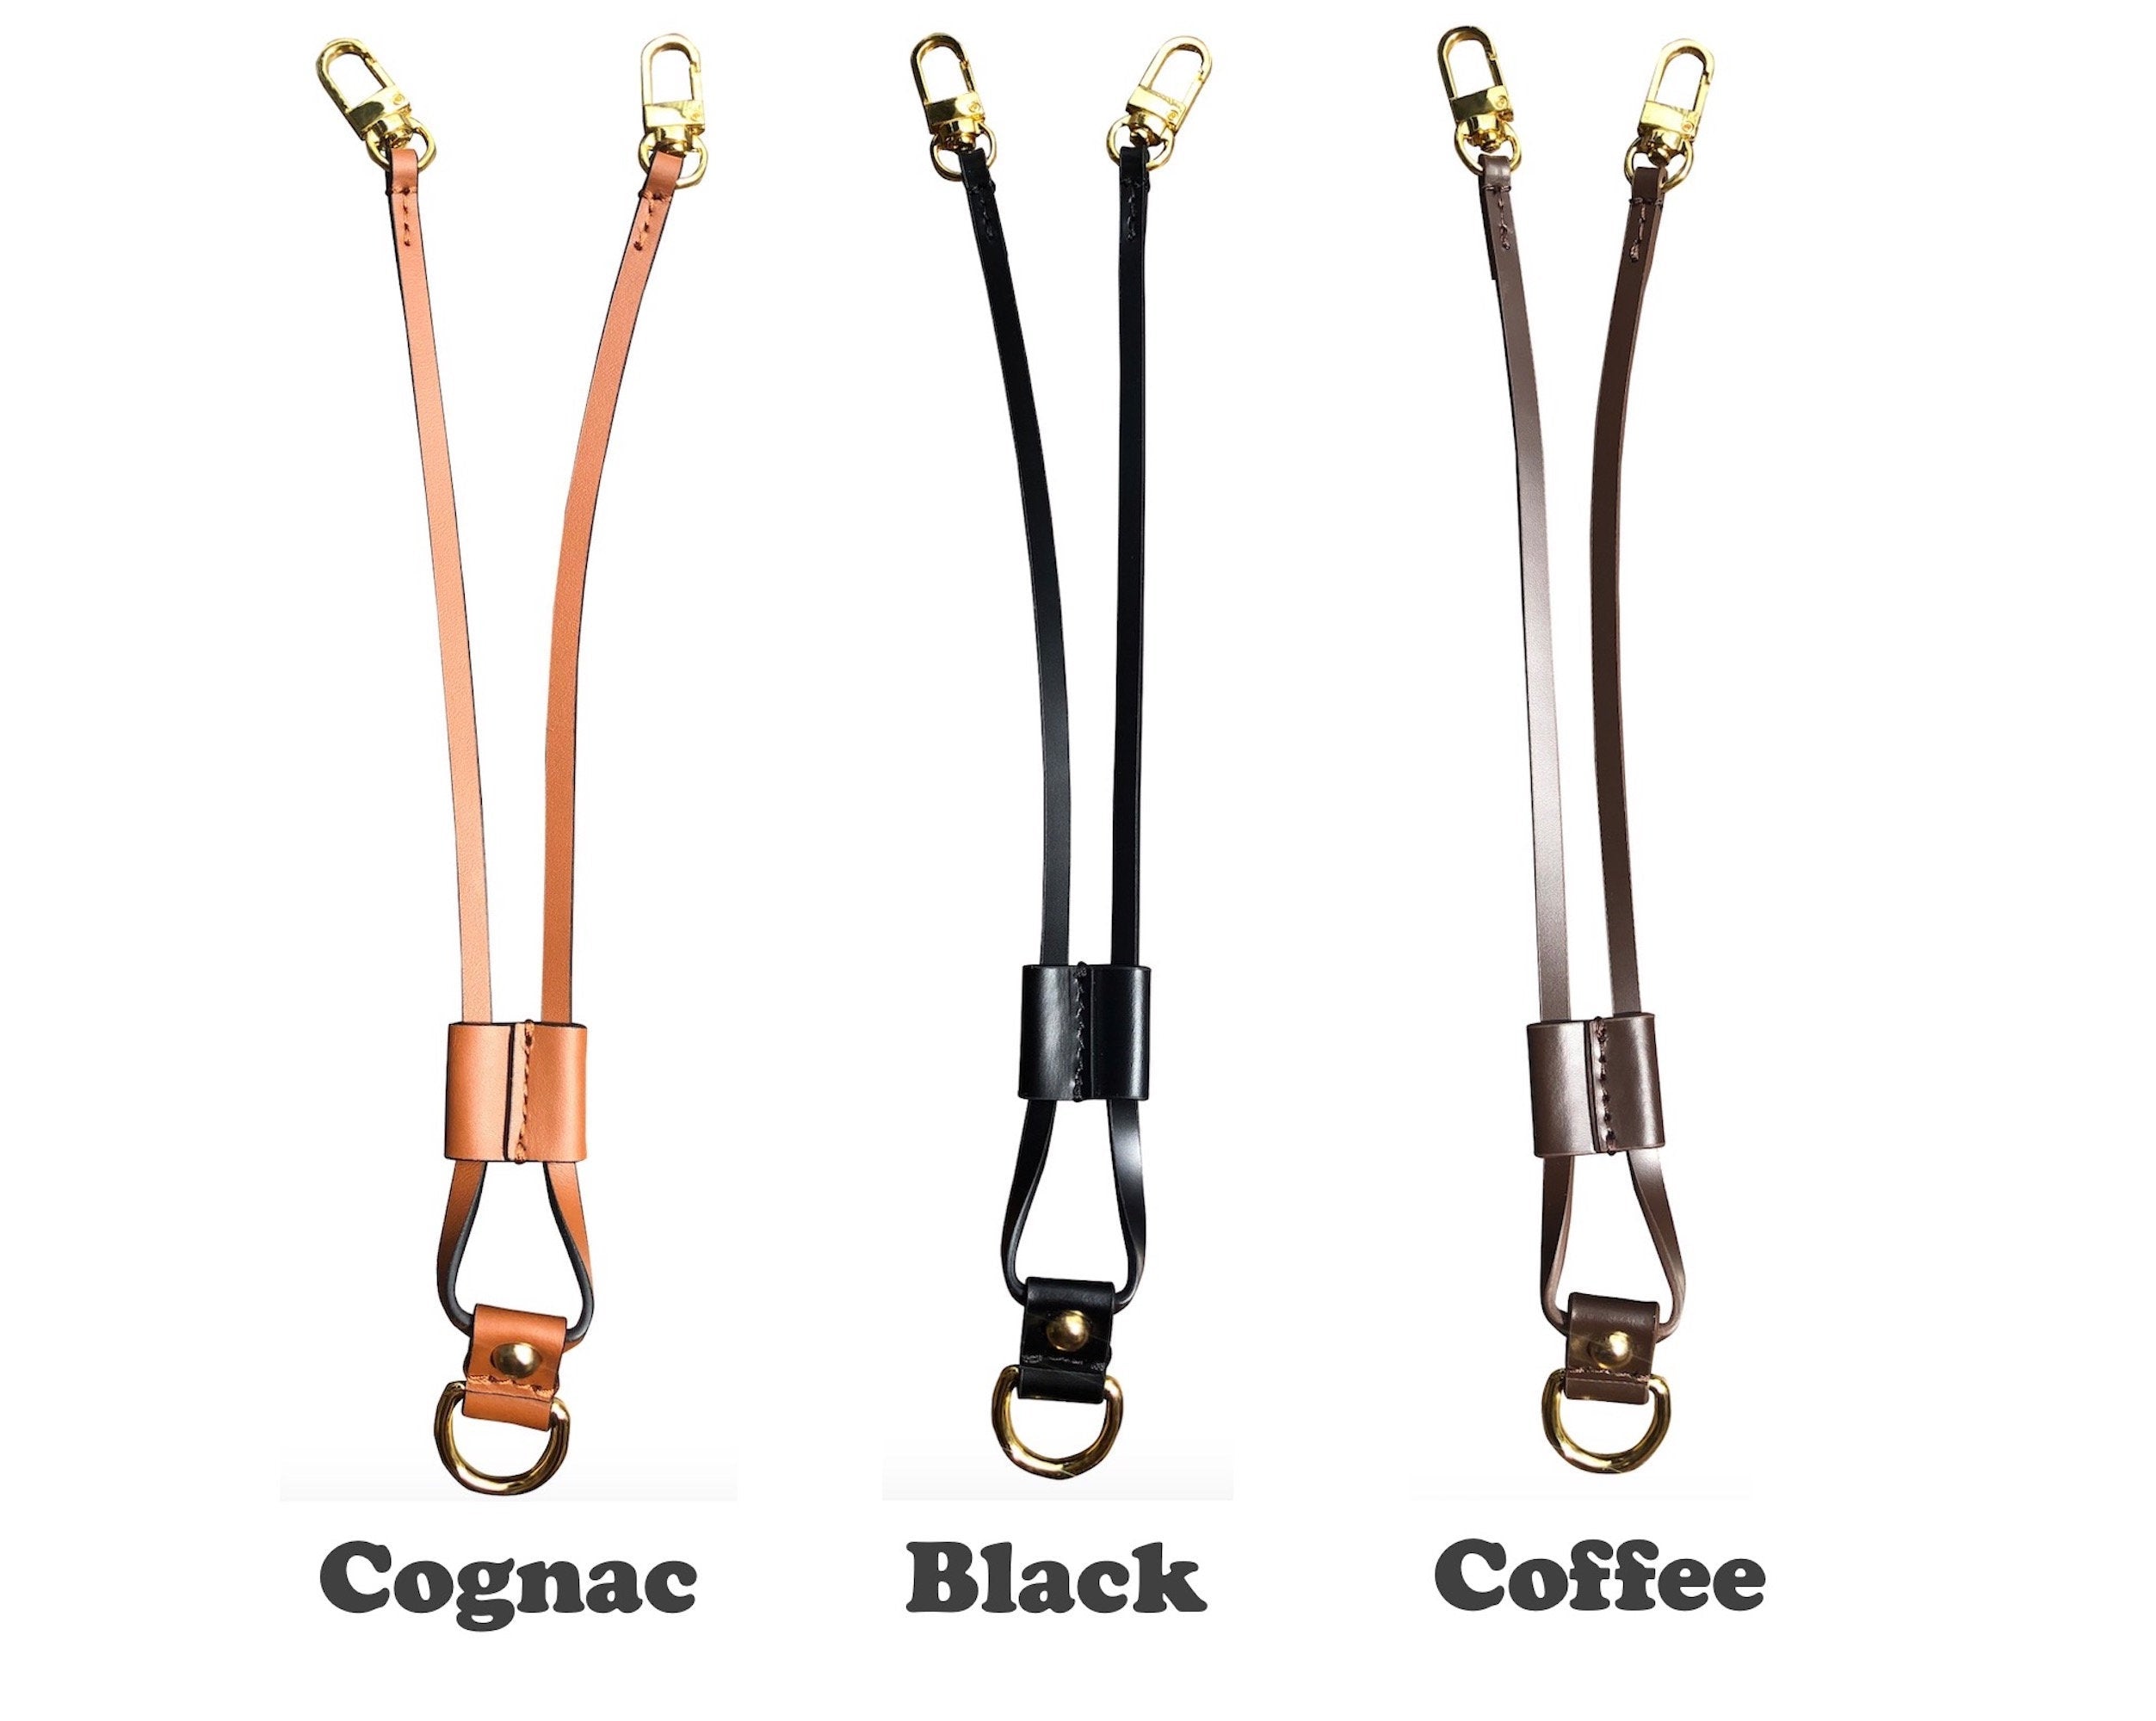 Can I get a replacement vachetta leather drawstring cord for my